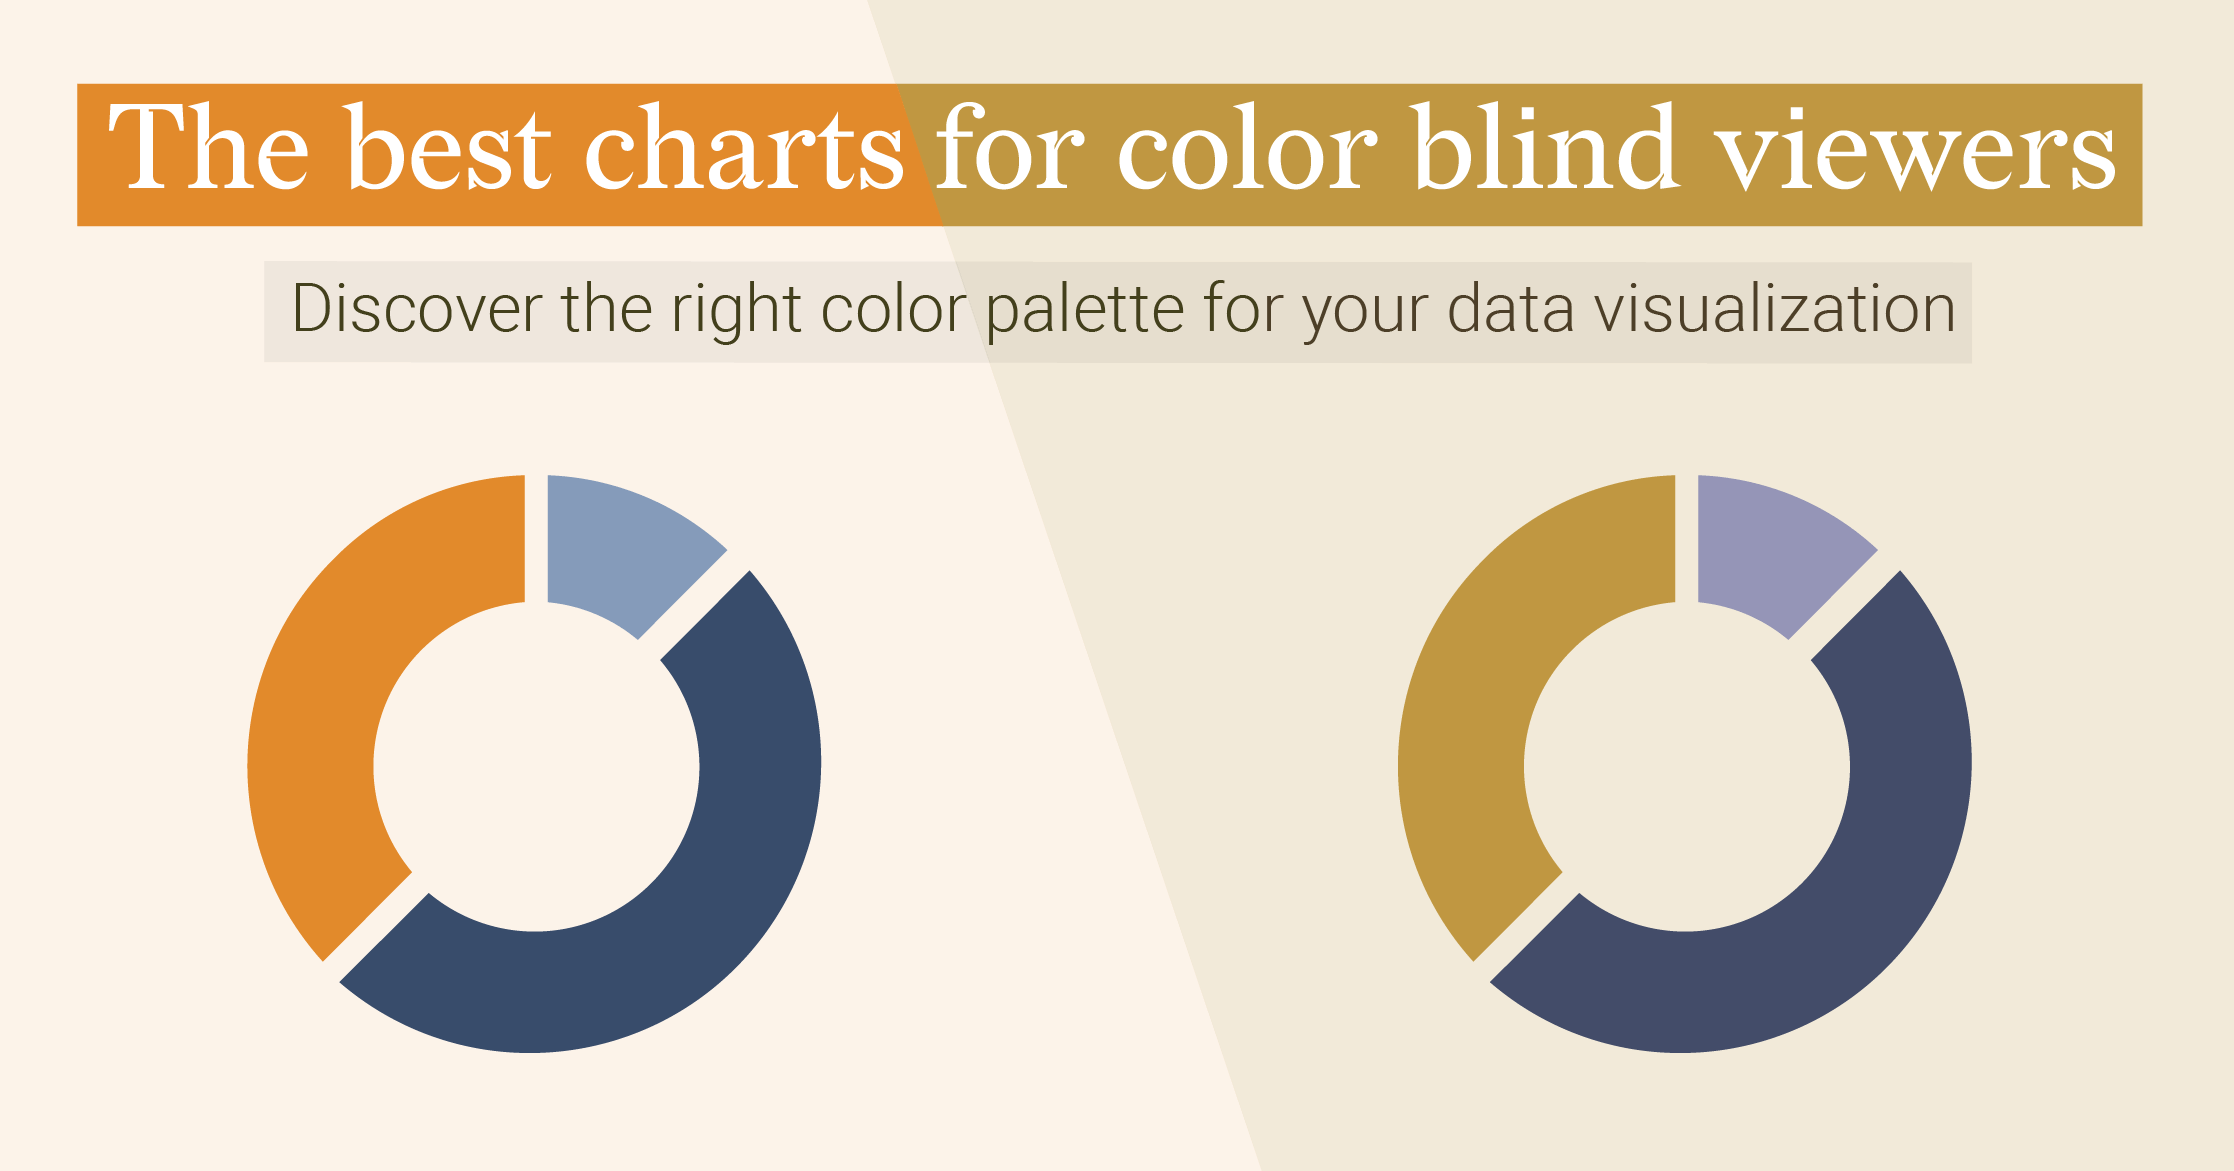 Best charts for color blind viewers - Find out what colors are the best and safest to use in a chart for color blind people, and what are the colors you should avoid using.